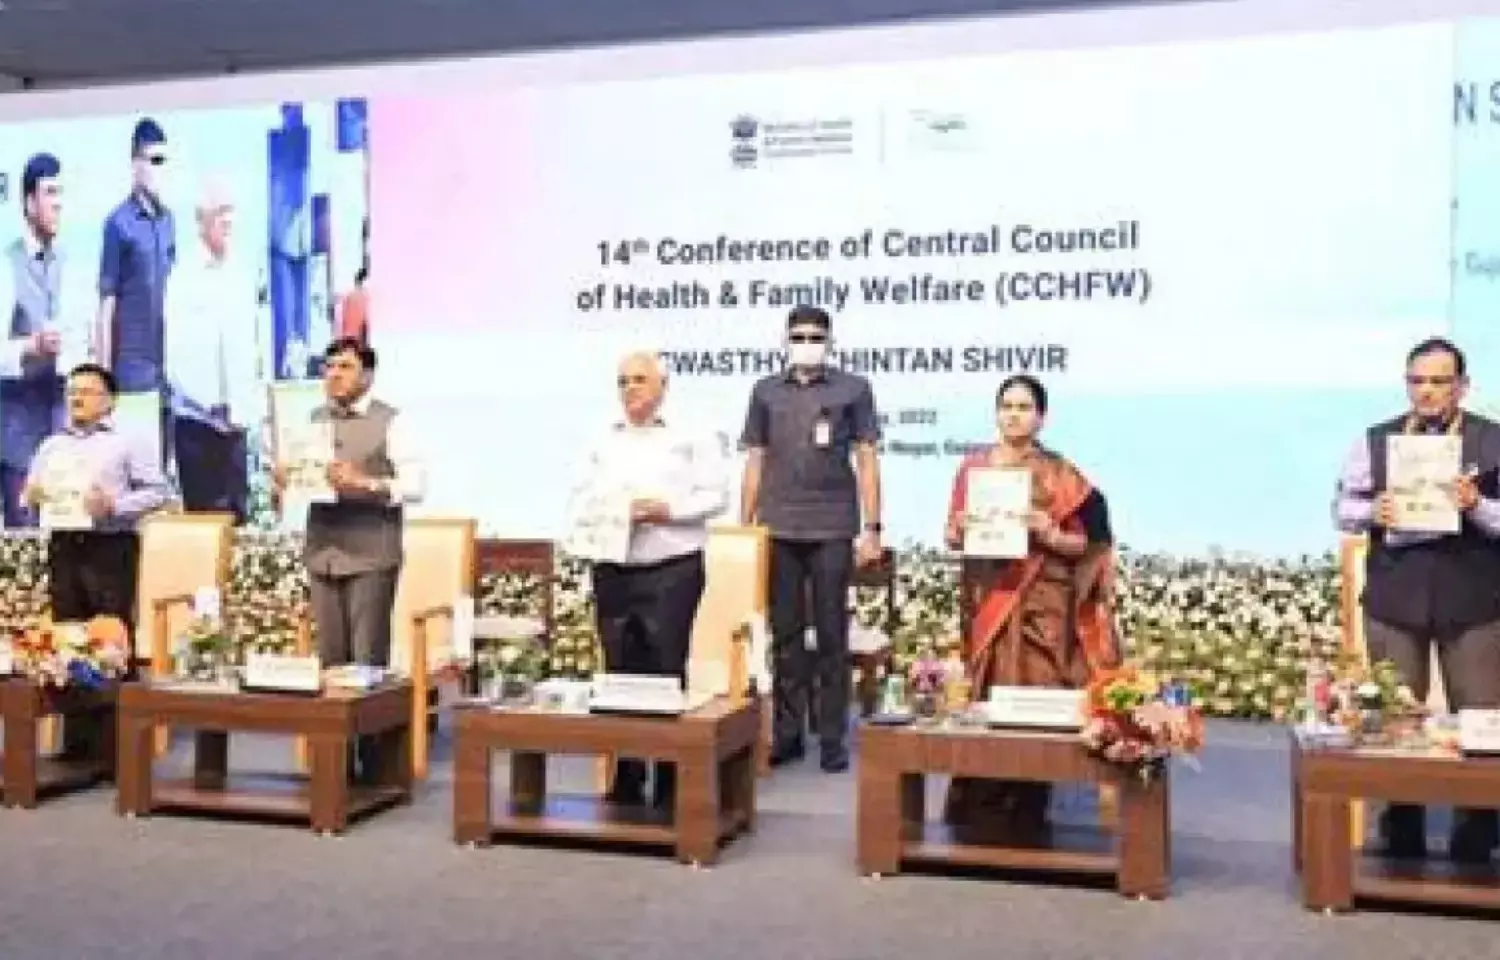 Union Health Minister releases 5th National family health Survey report at Swasthya Chintan Shivir